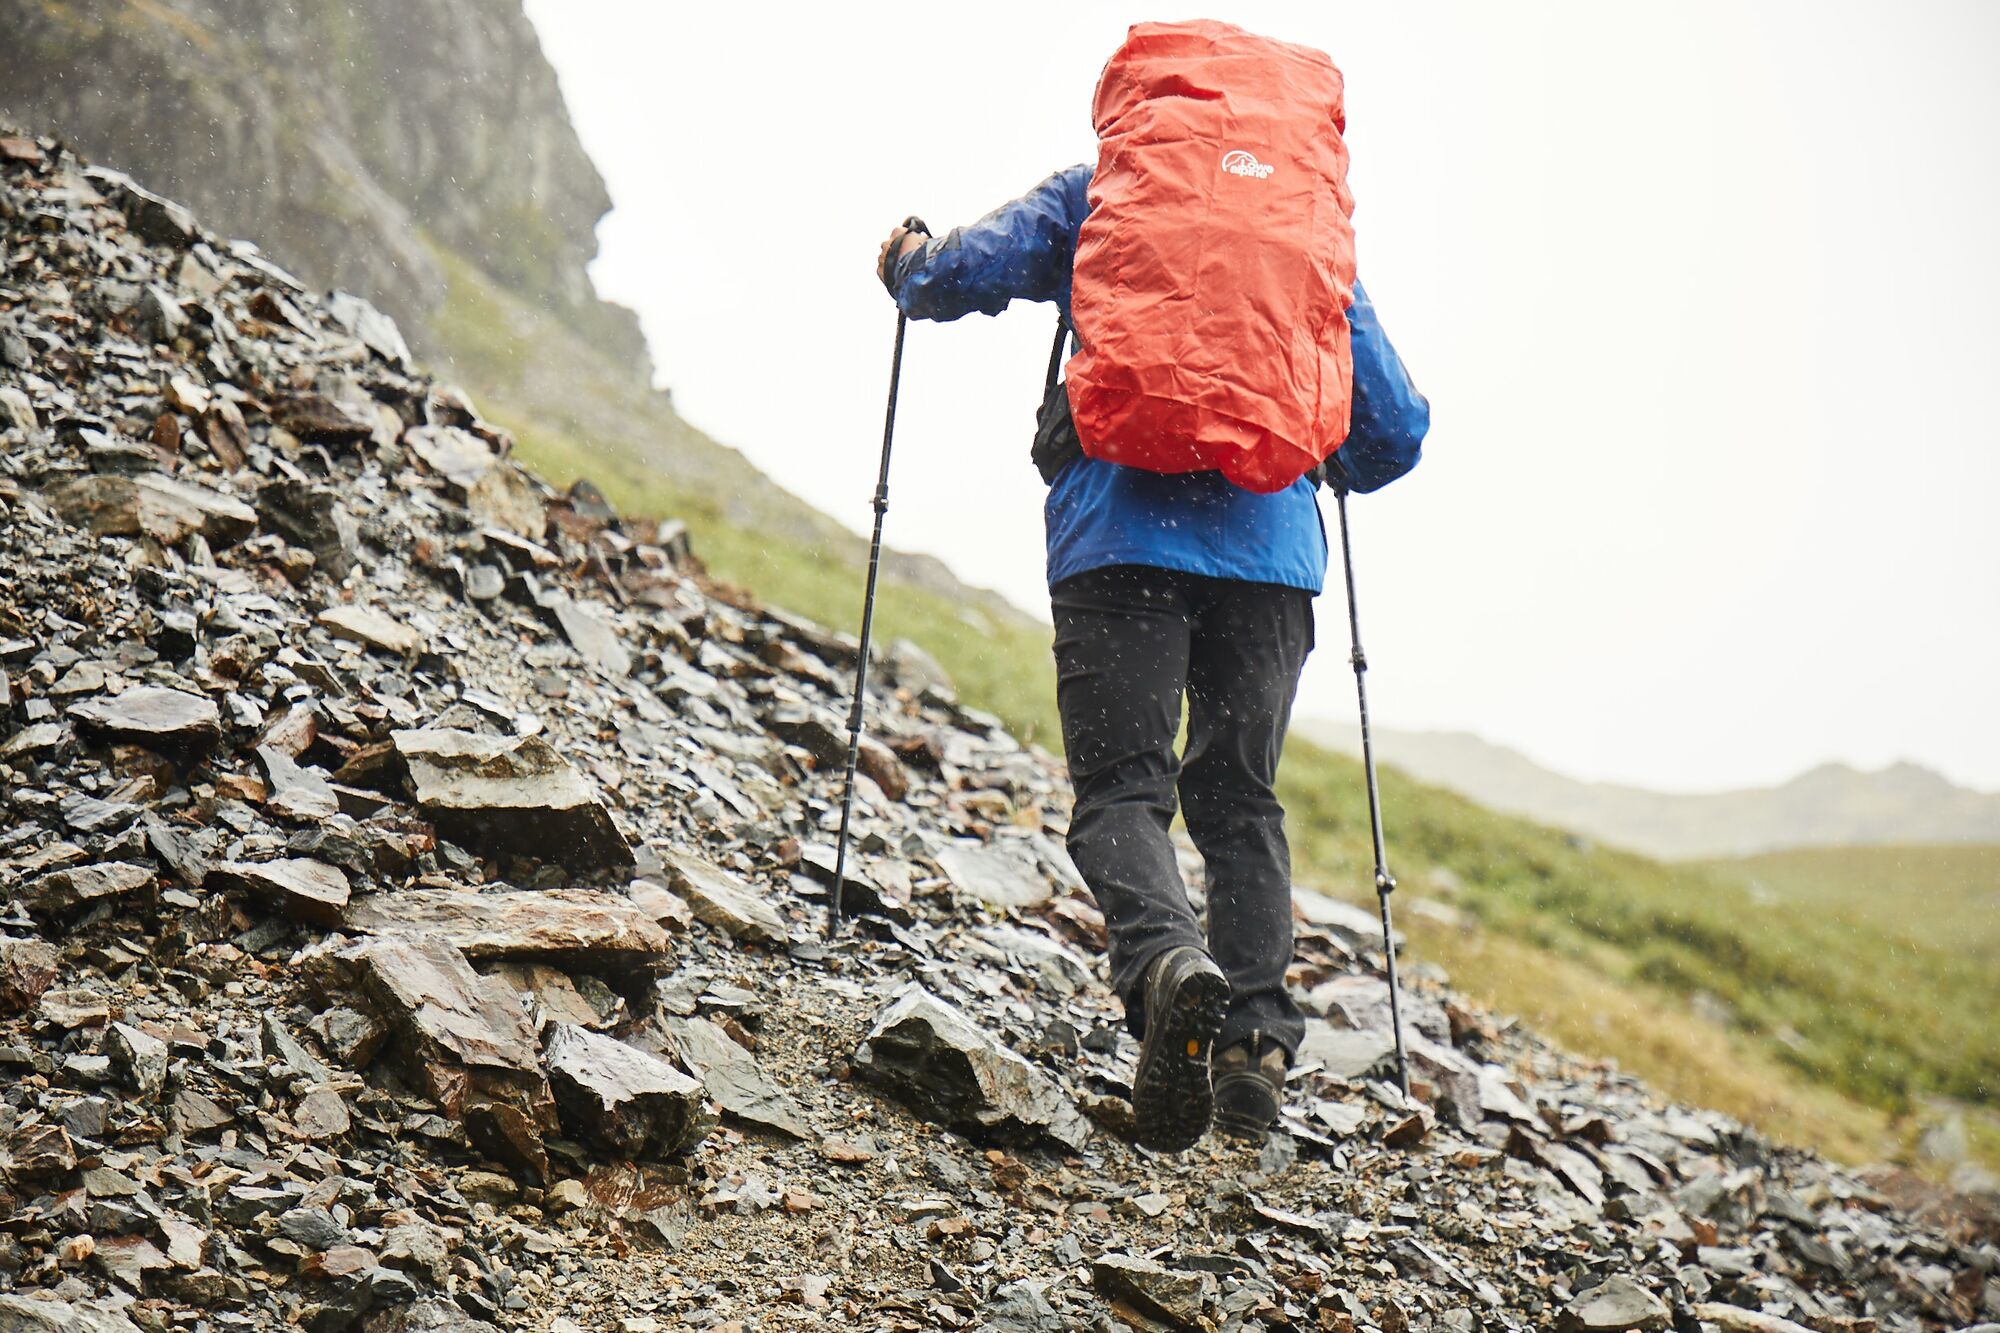 How to Choose the Best Hiking Trousers